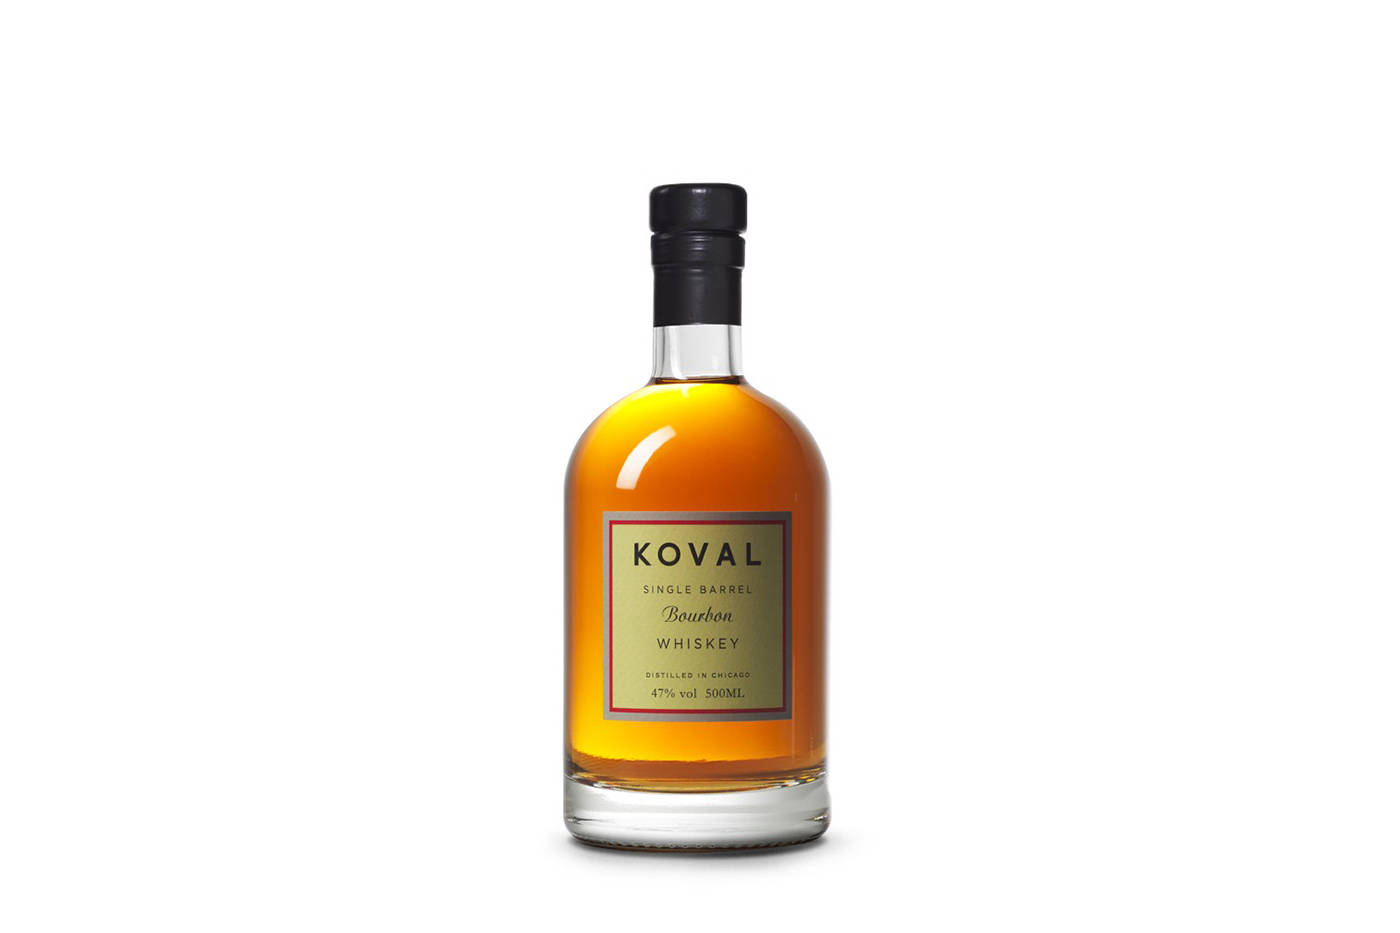 Koval Bourbon Whiskey Picture